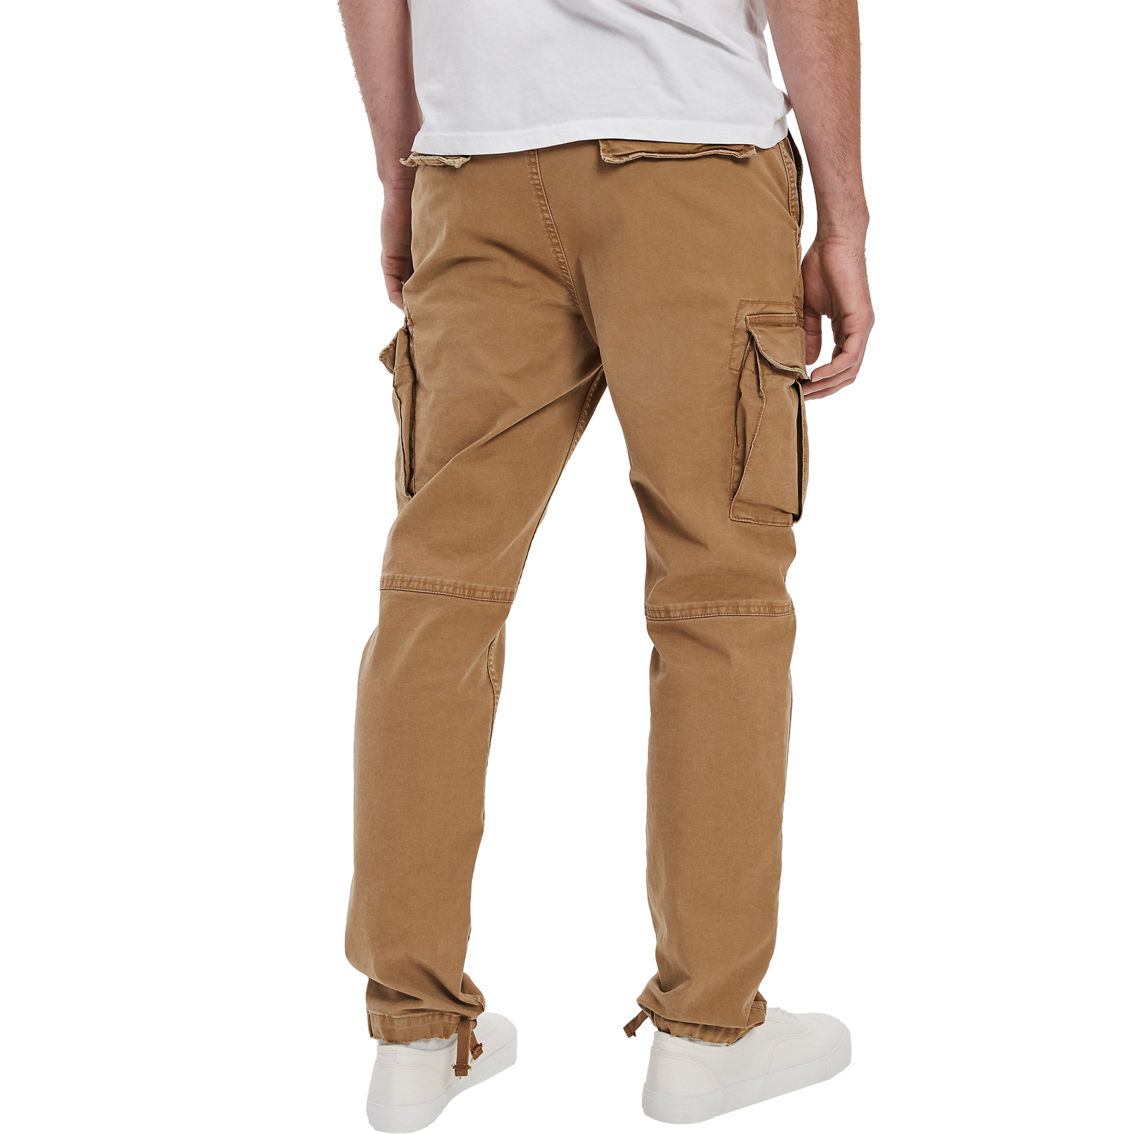 American Eagle Flex Slim Lived-In Cargo Pants - Image 2 of 5